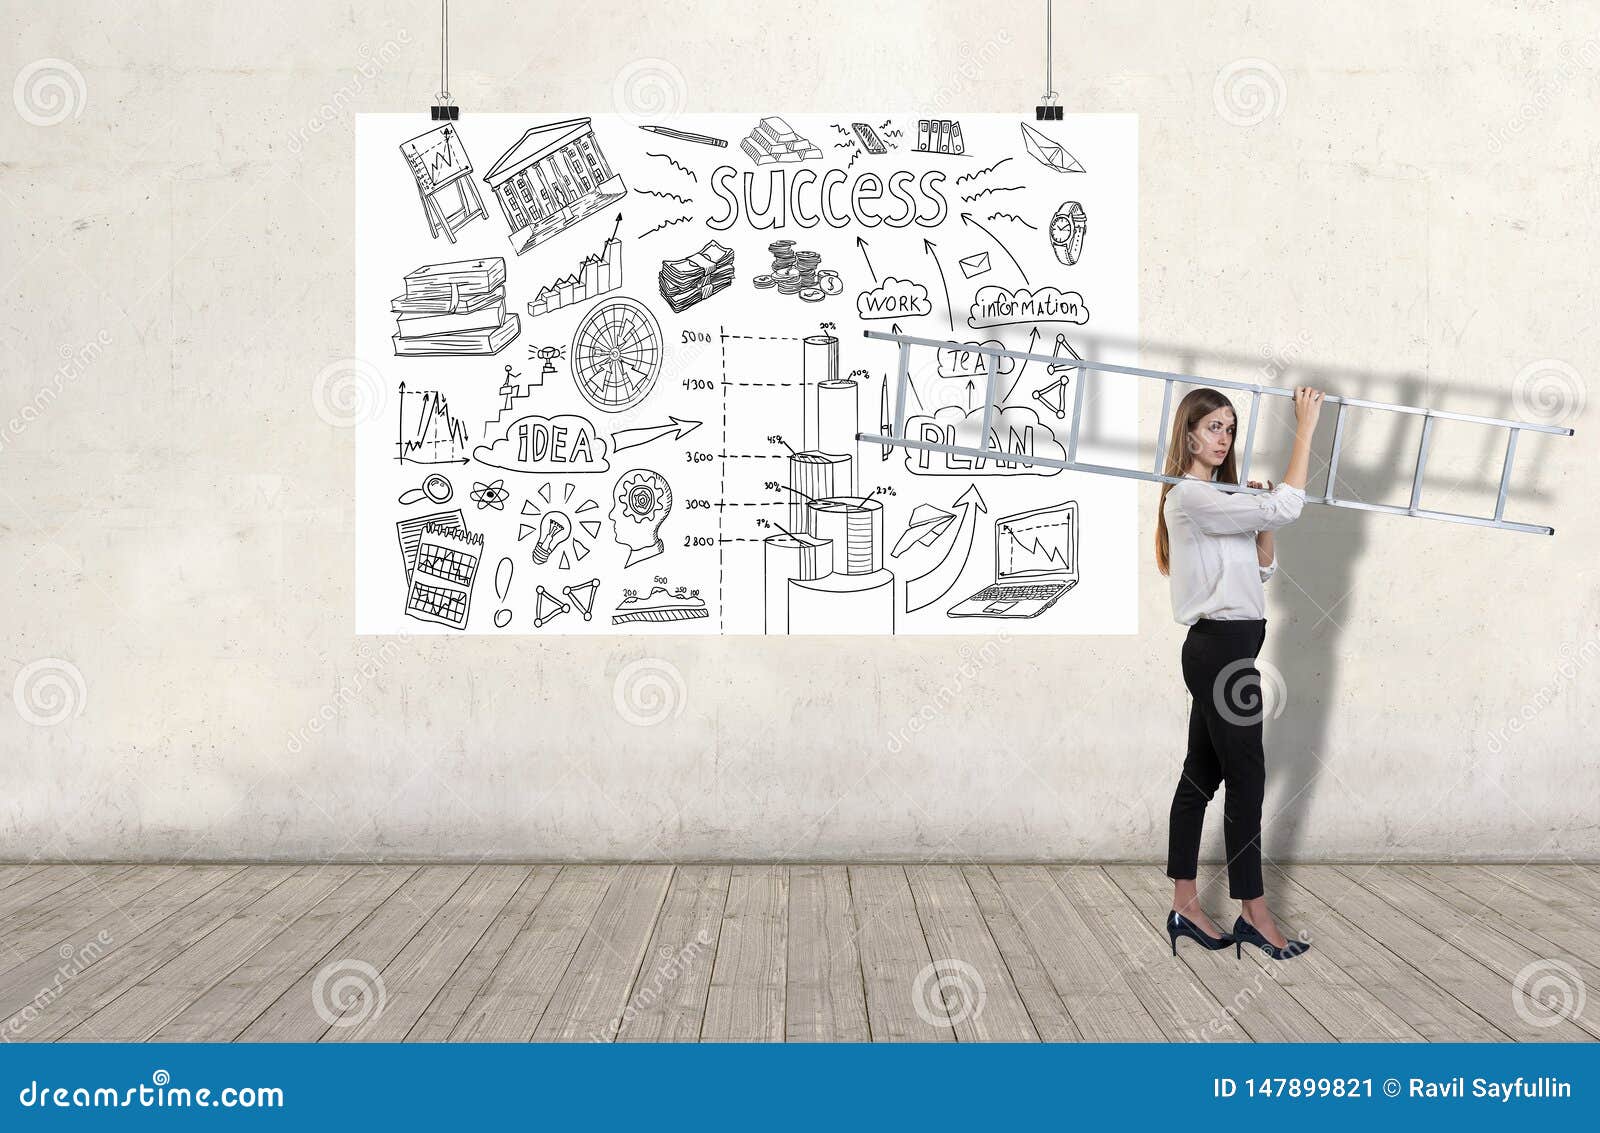 Young Woman Carrying A Ladder By A Wall With Business Plan Sketch On A White Banner 3d Render Elements In Collage Stock Image Image Of Seminar Idea